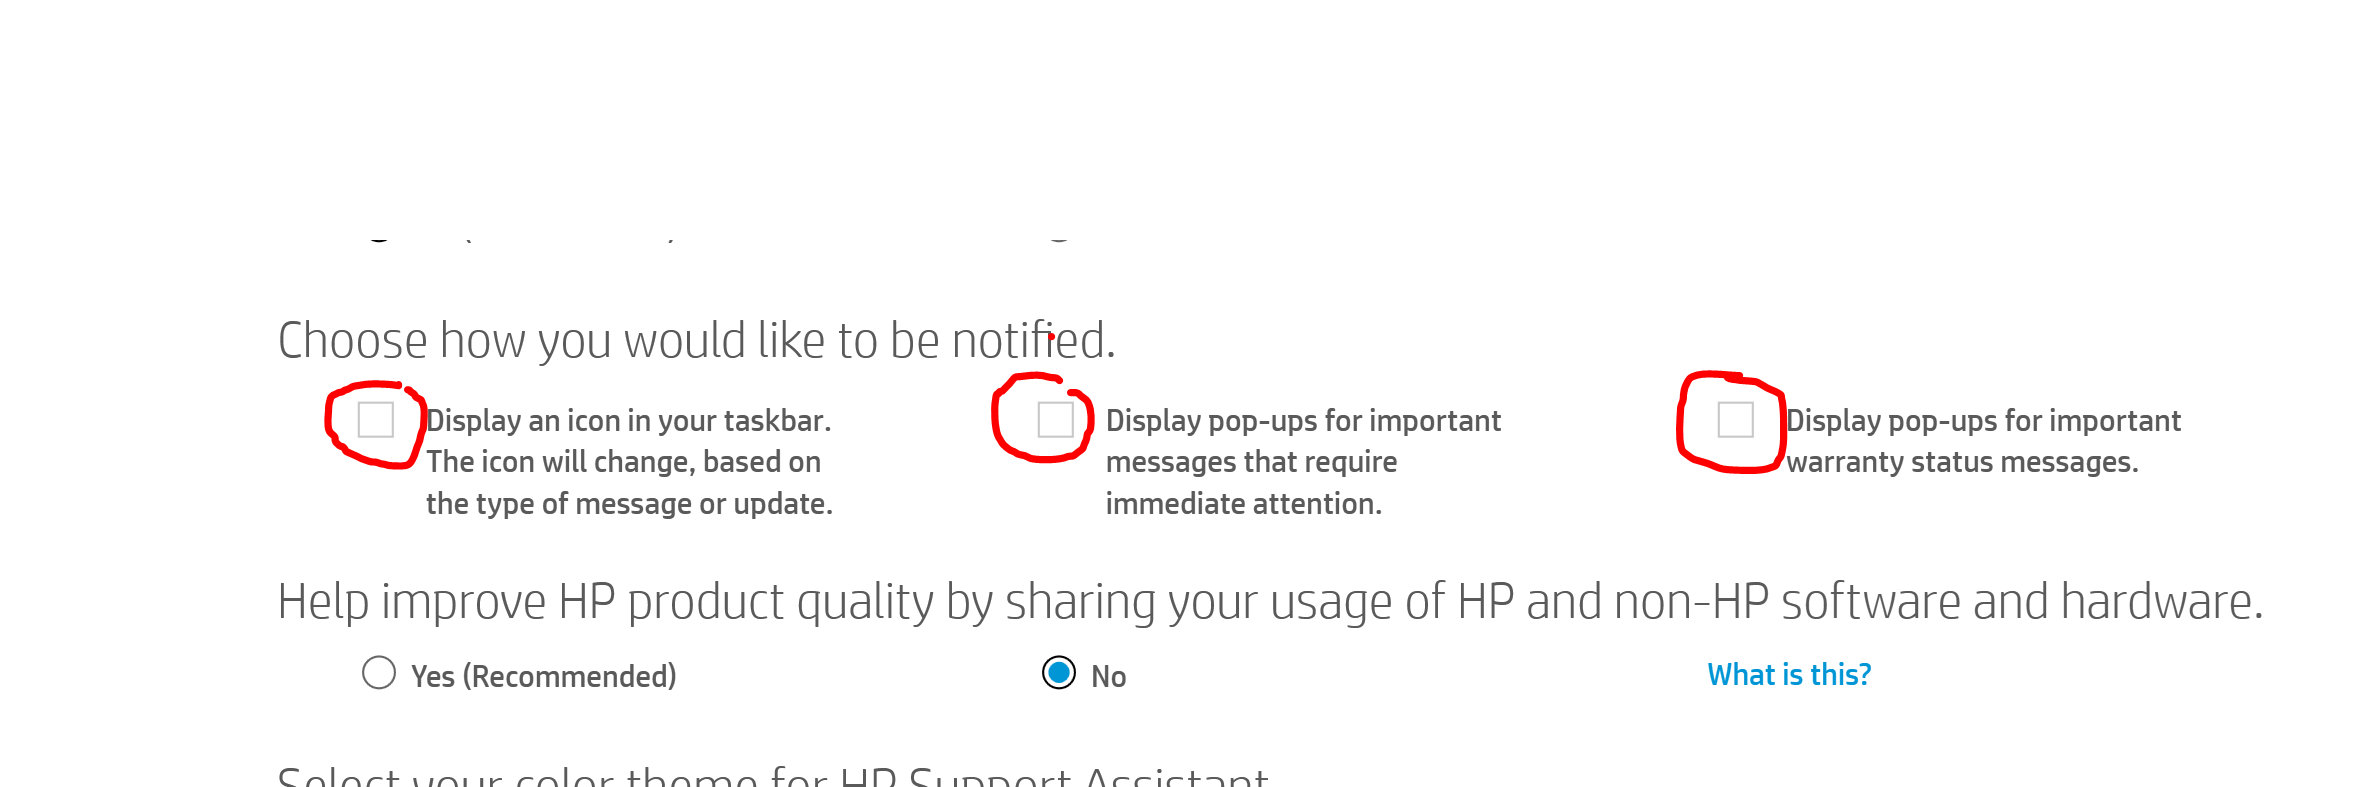 Pop up "Check HP Warranty Status" - HP Support Community ...